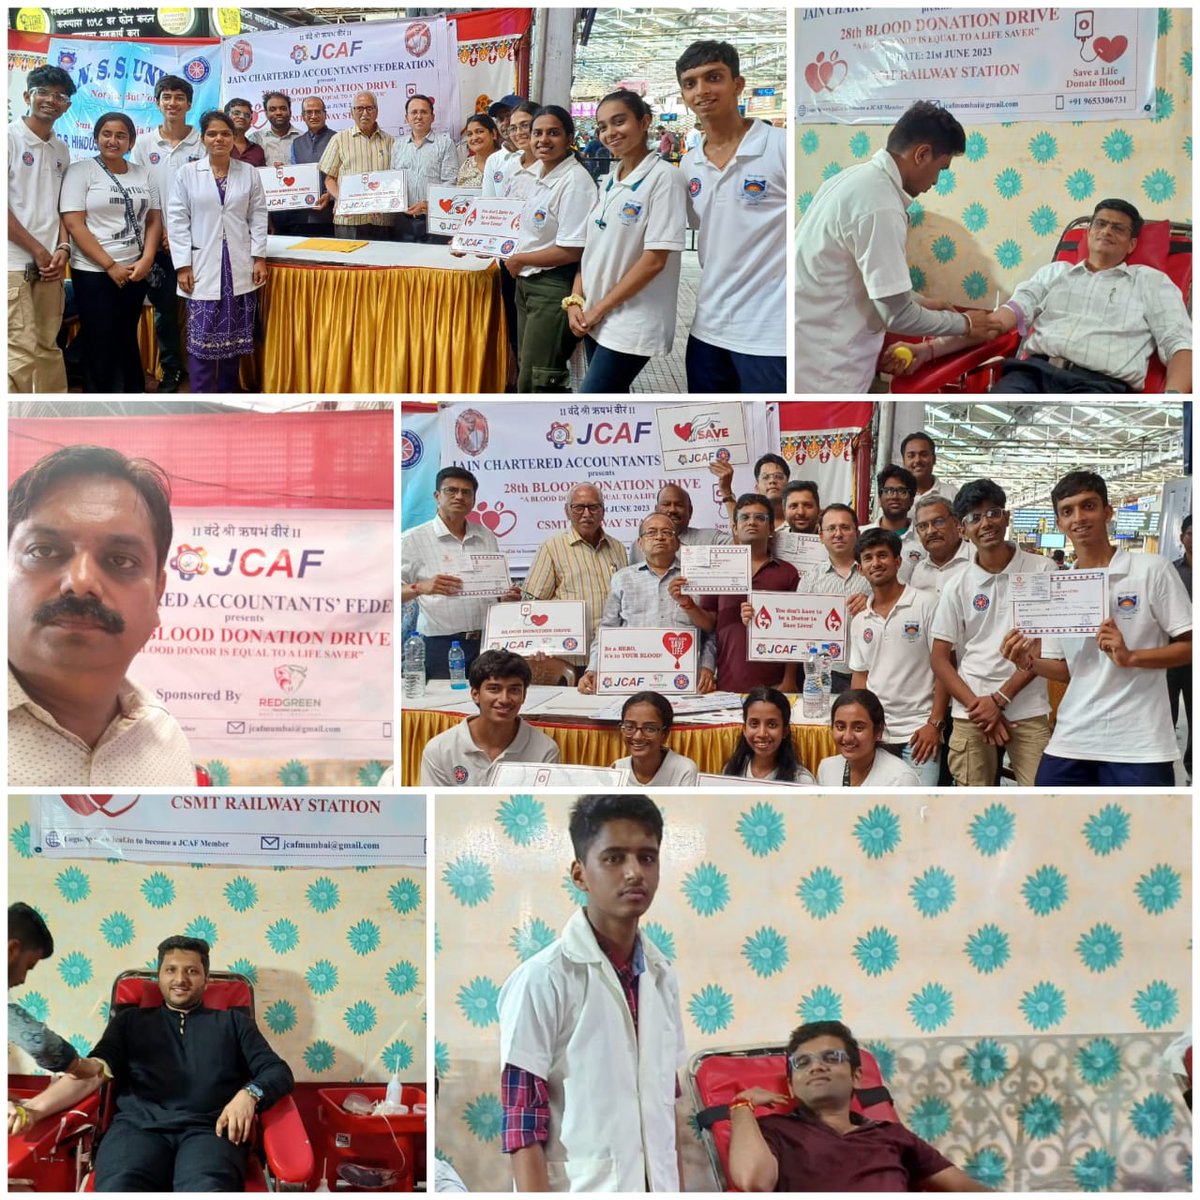 121 units of Blood were collected at the 28th Blood Donation Drive at CSMT Station on 21st June 2023.
.
.
.
#blooddonation #blooddonationcamp #blooddonationdrive #donateblood #donatebloodsavelives #blooddonors #blooddonate #donatebloodsavelife